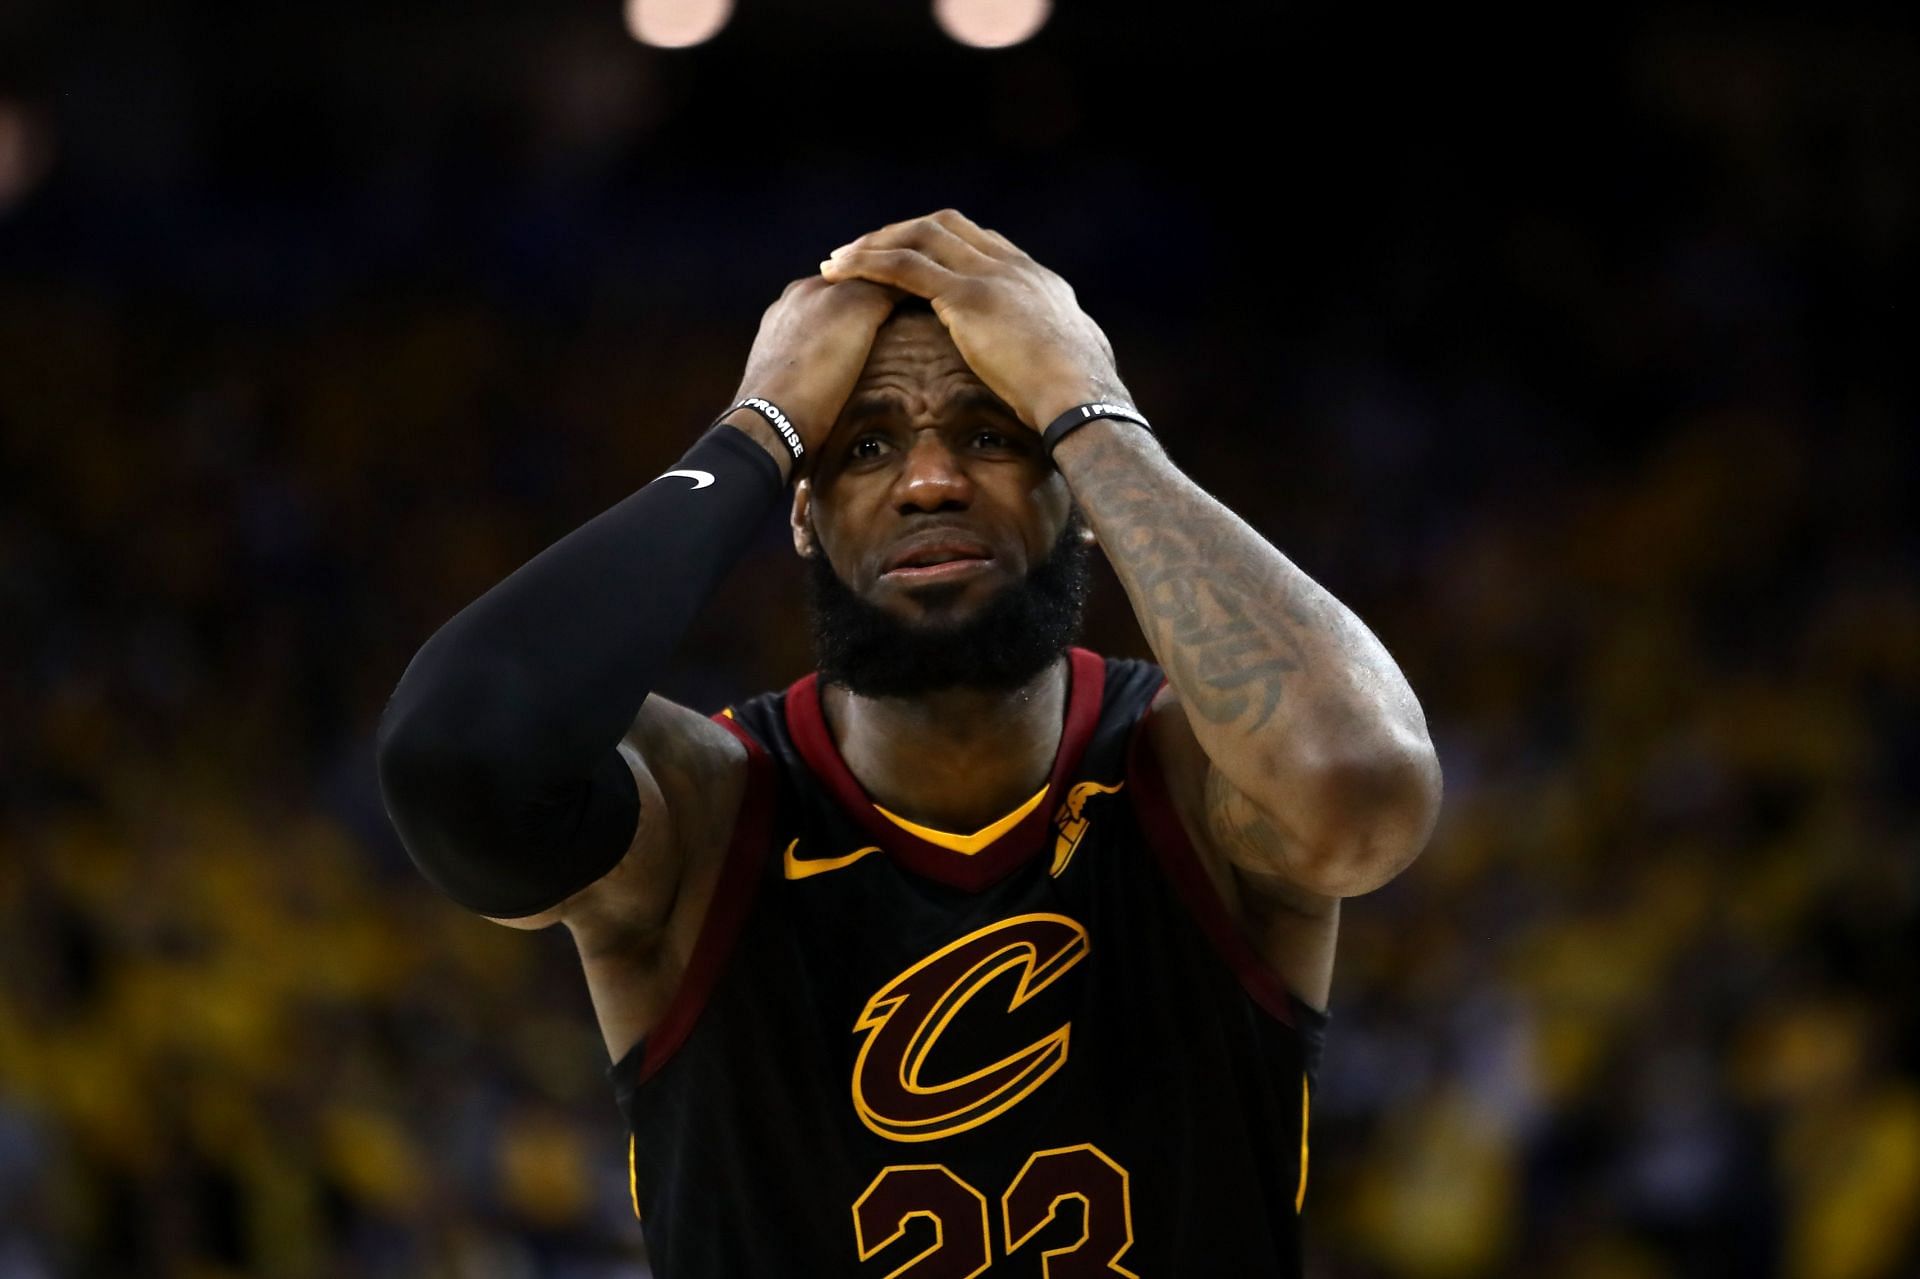 LeBron James created an iconic meme during the 2018 Finals.